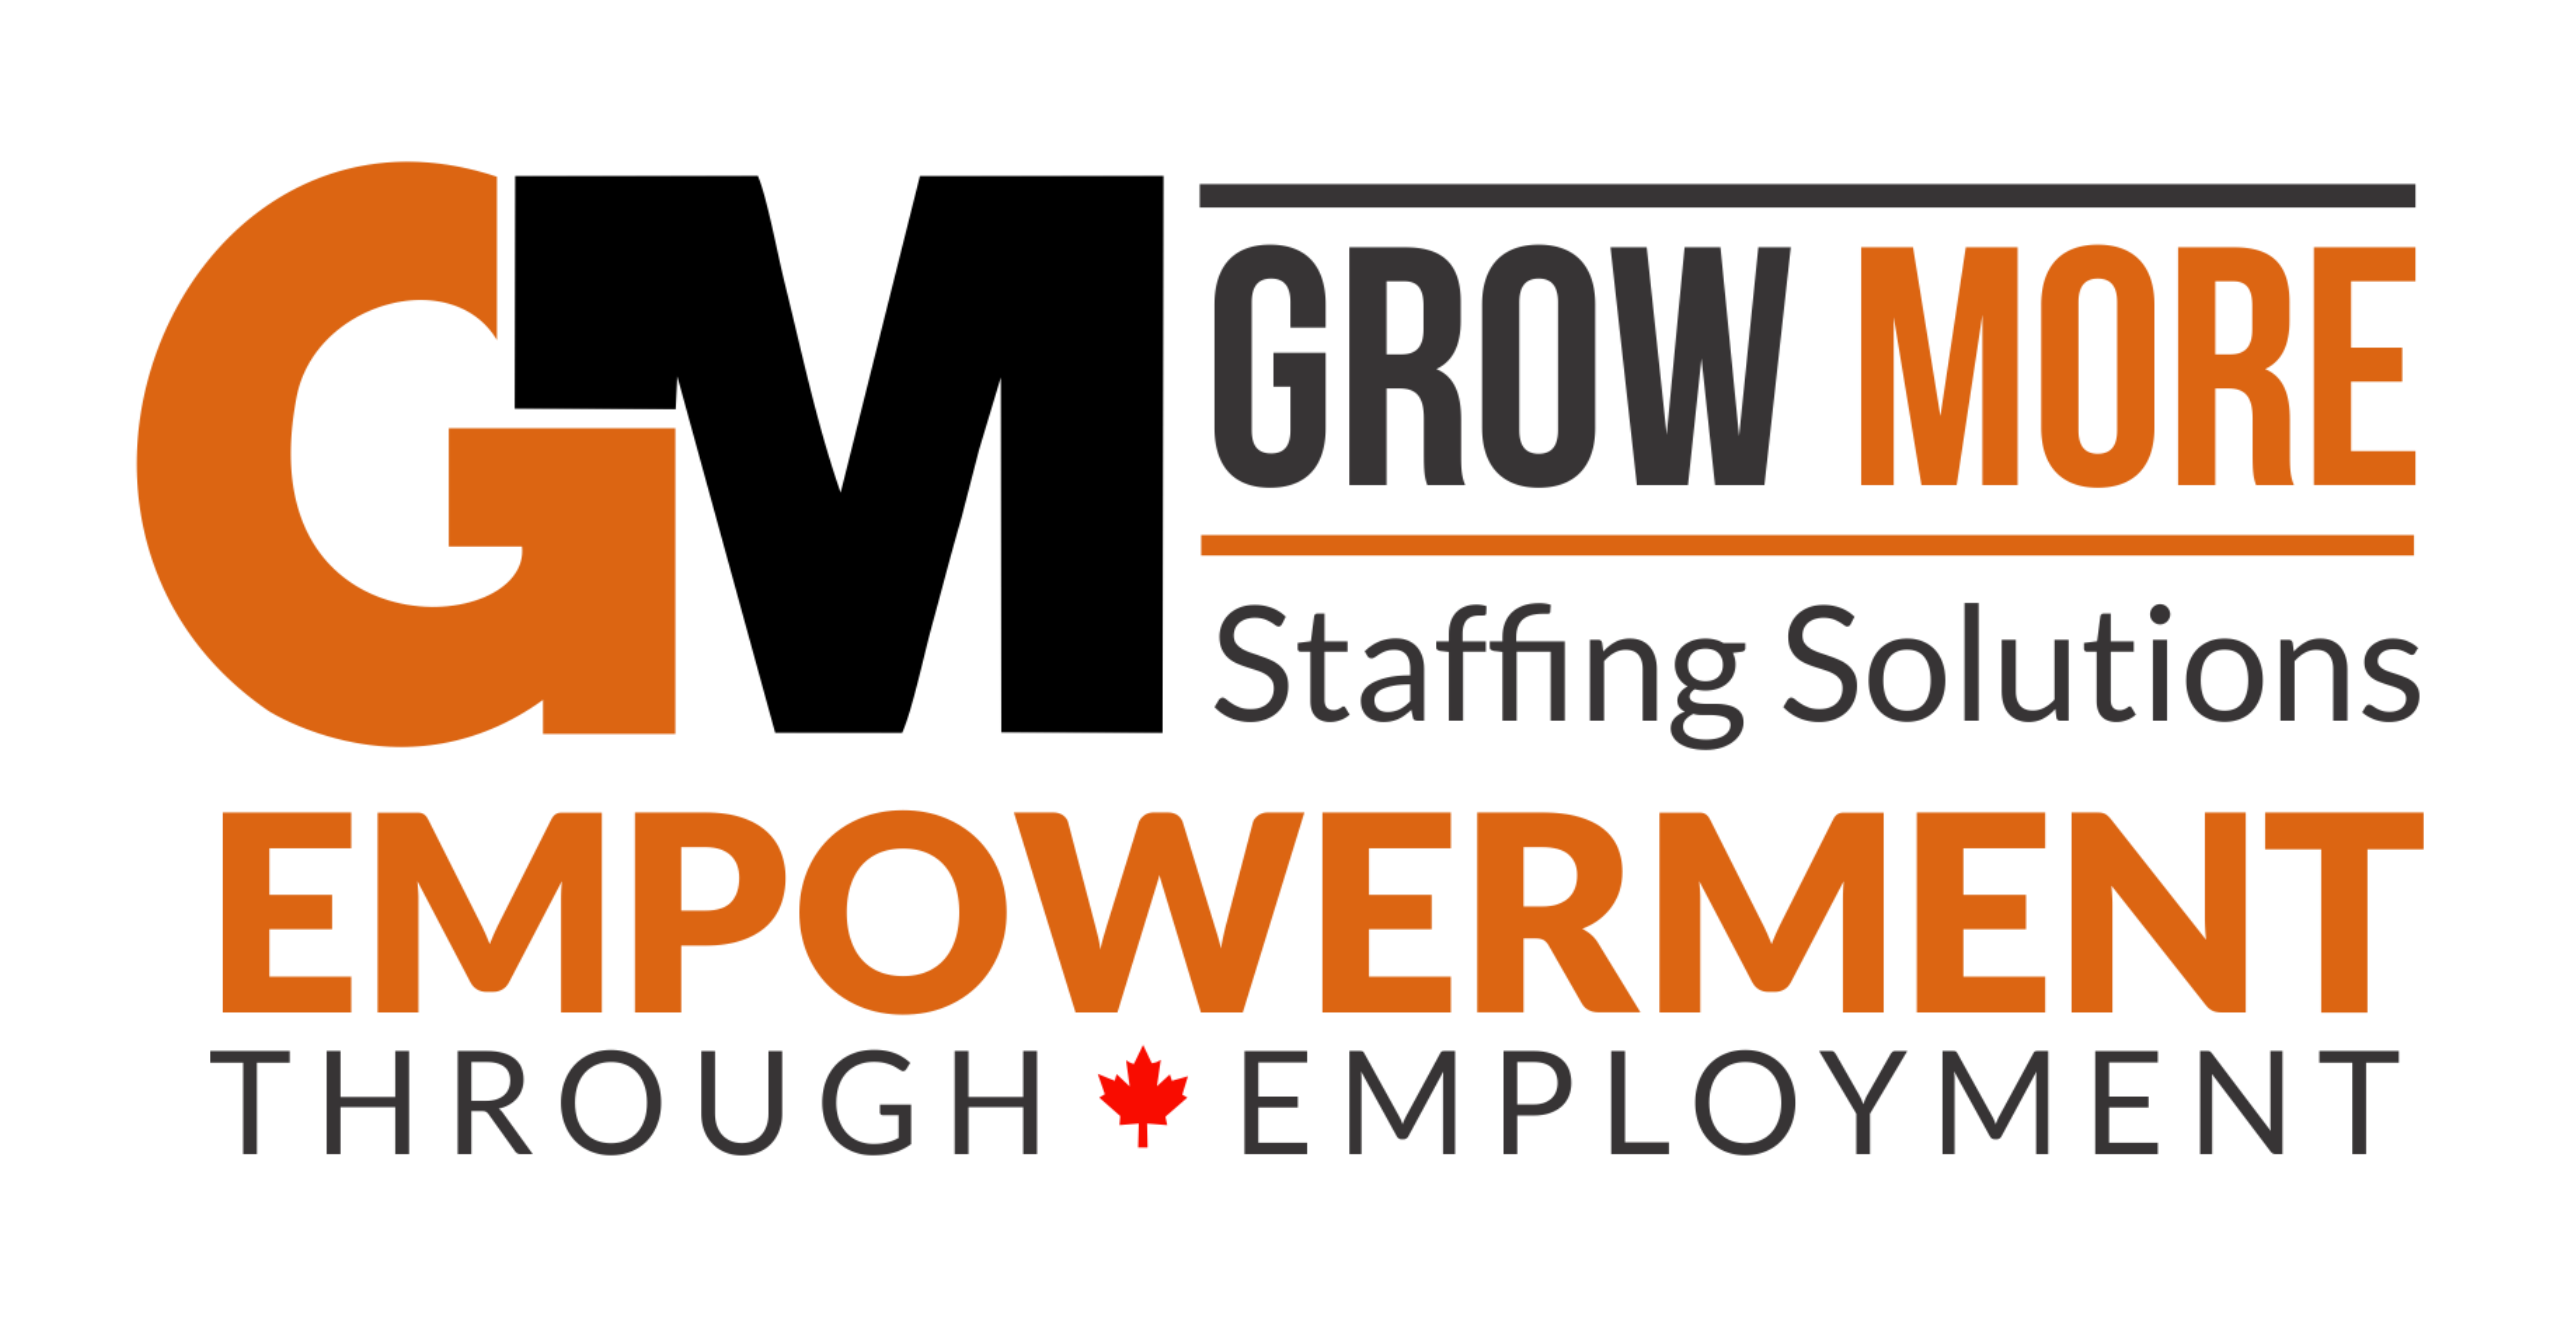 Grow More Staffing Solutions  Logo